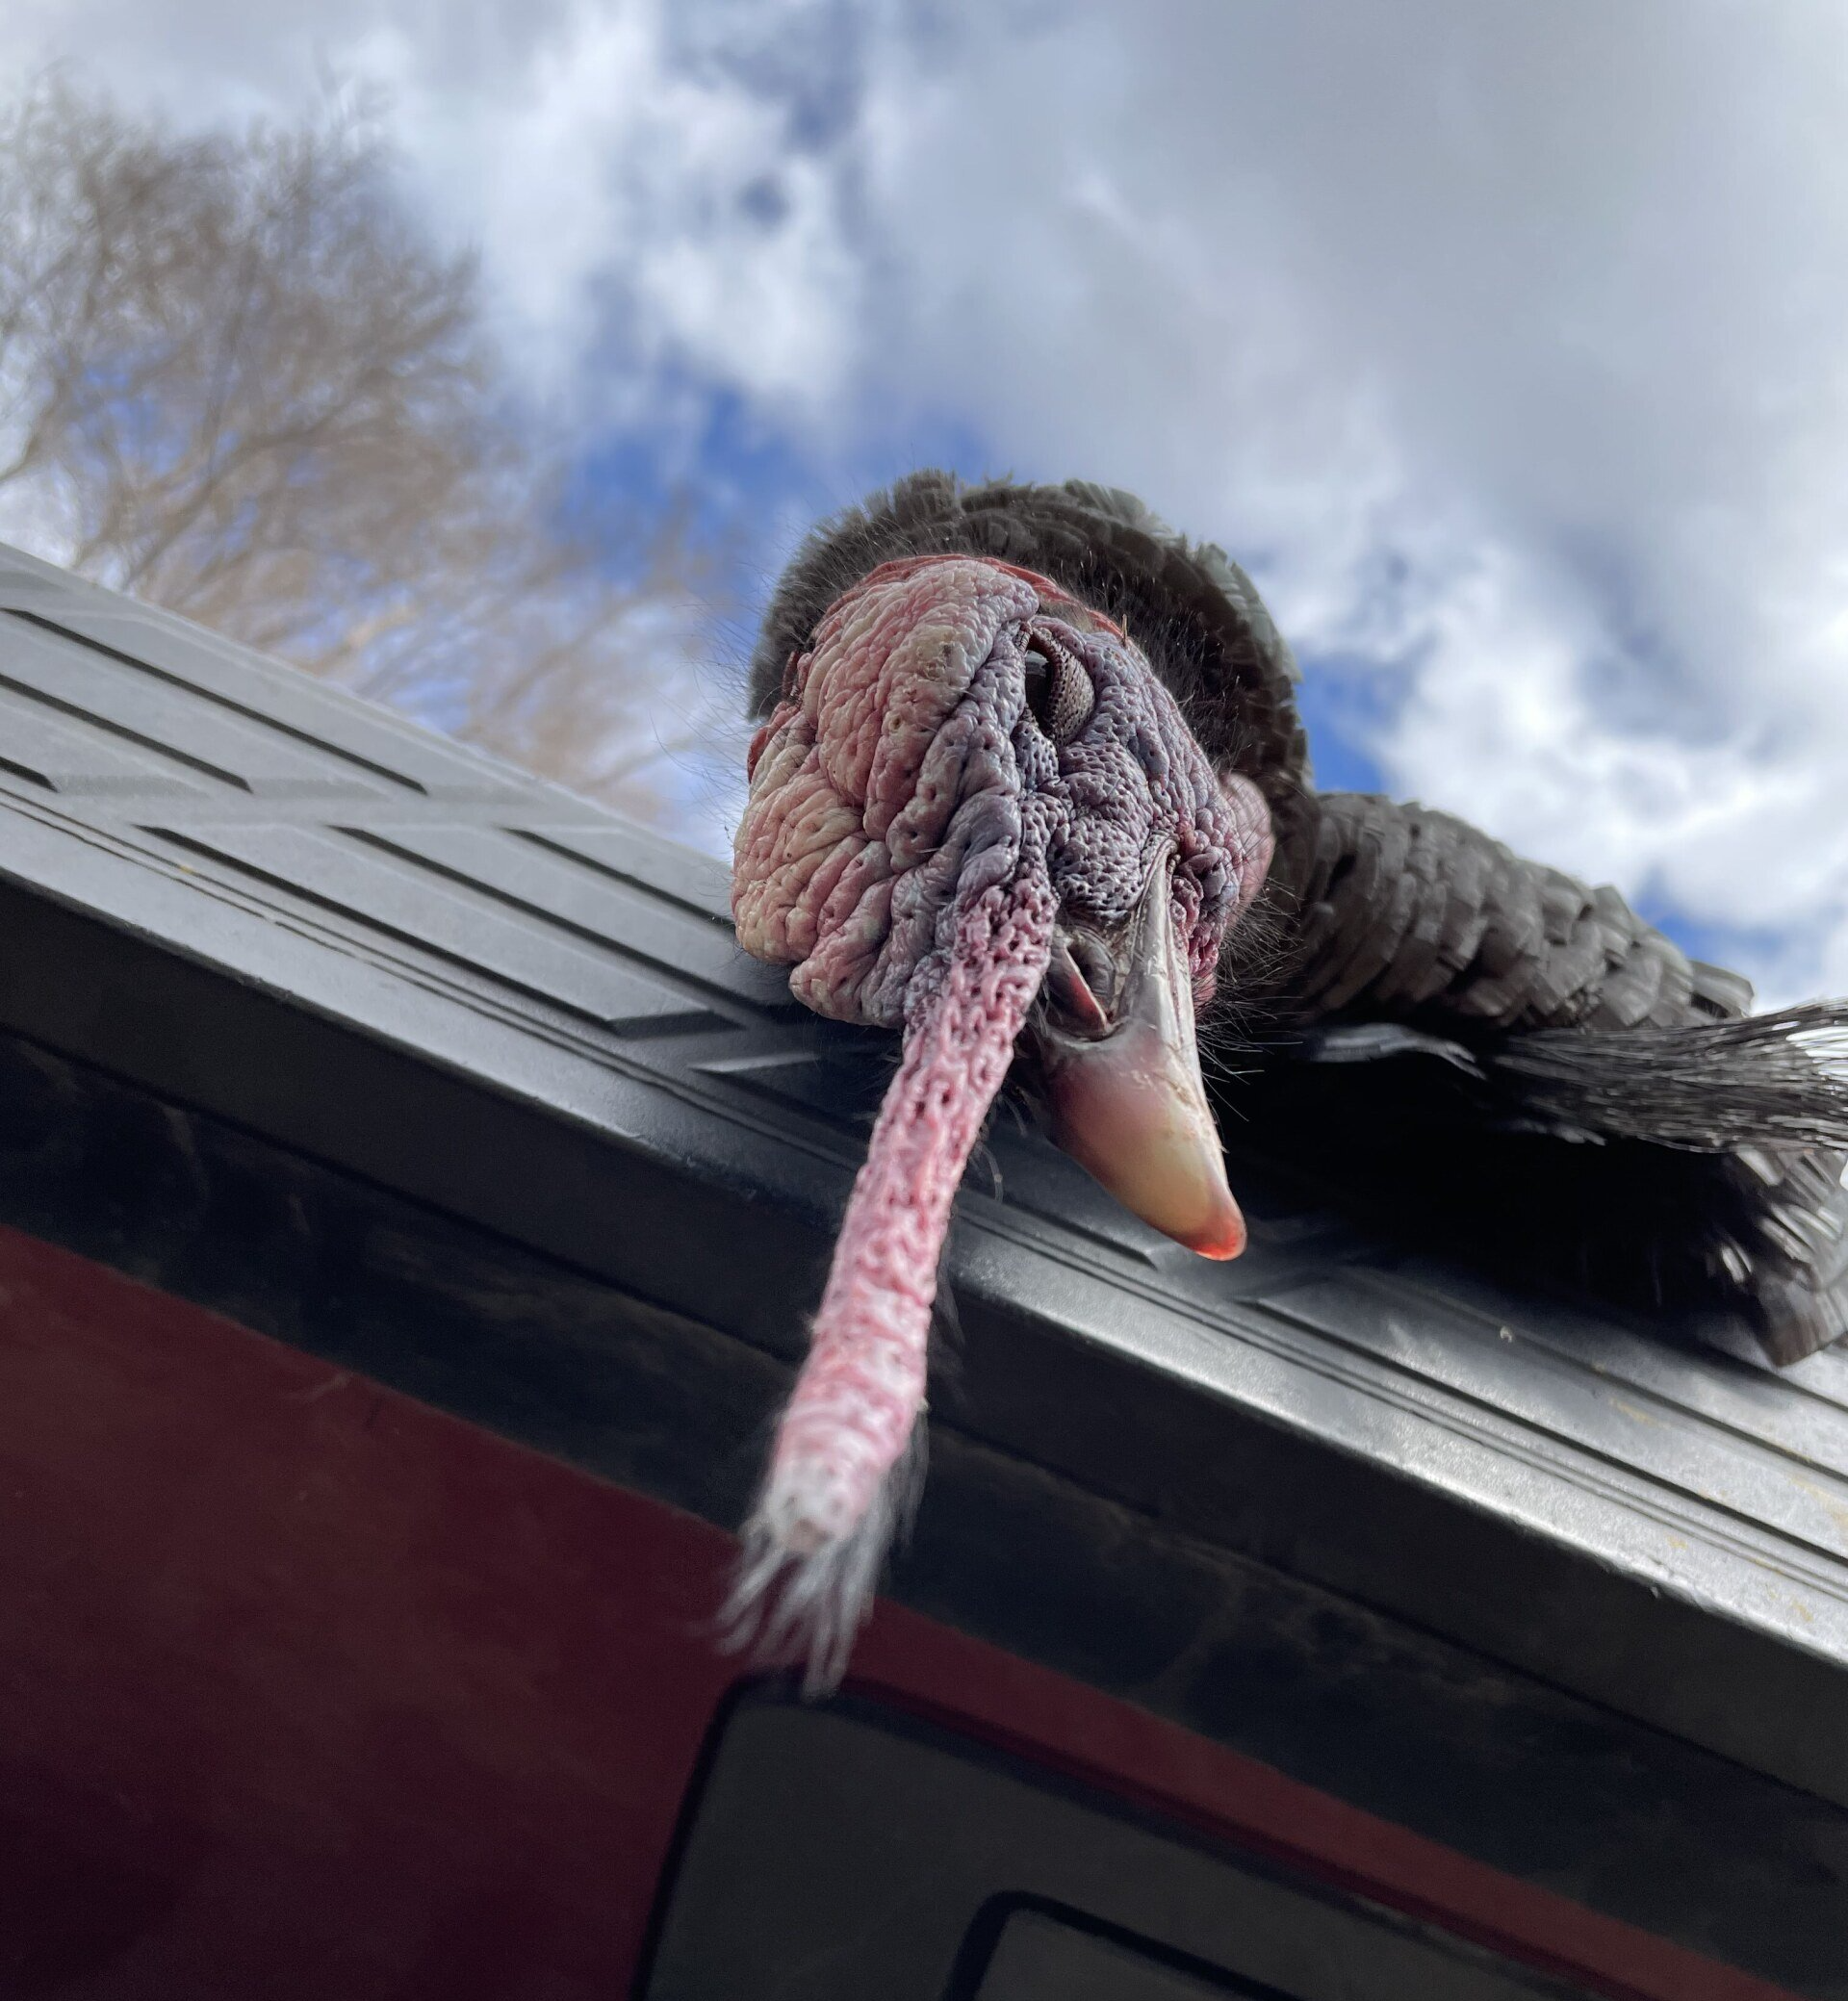 A turkey is laying on the roof of a building